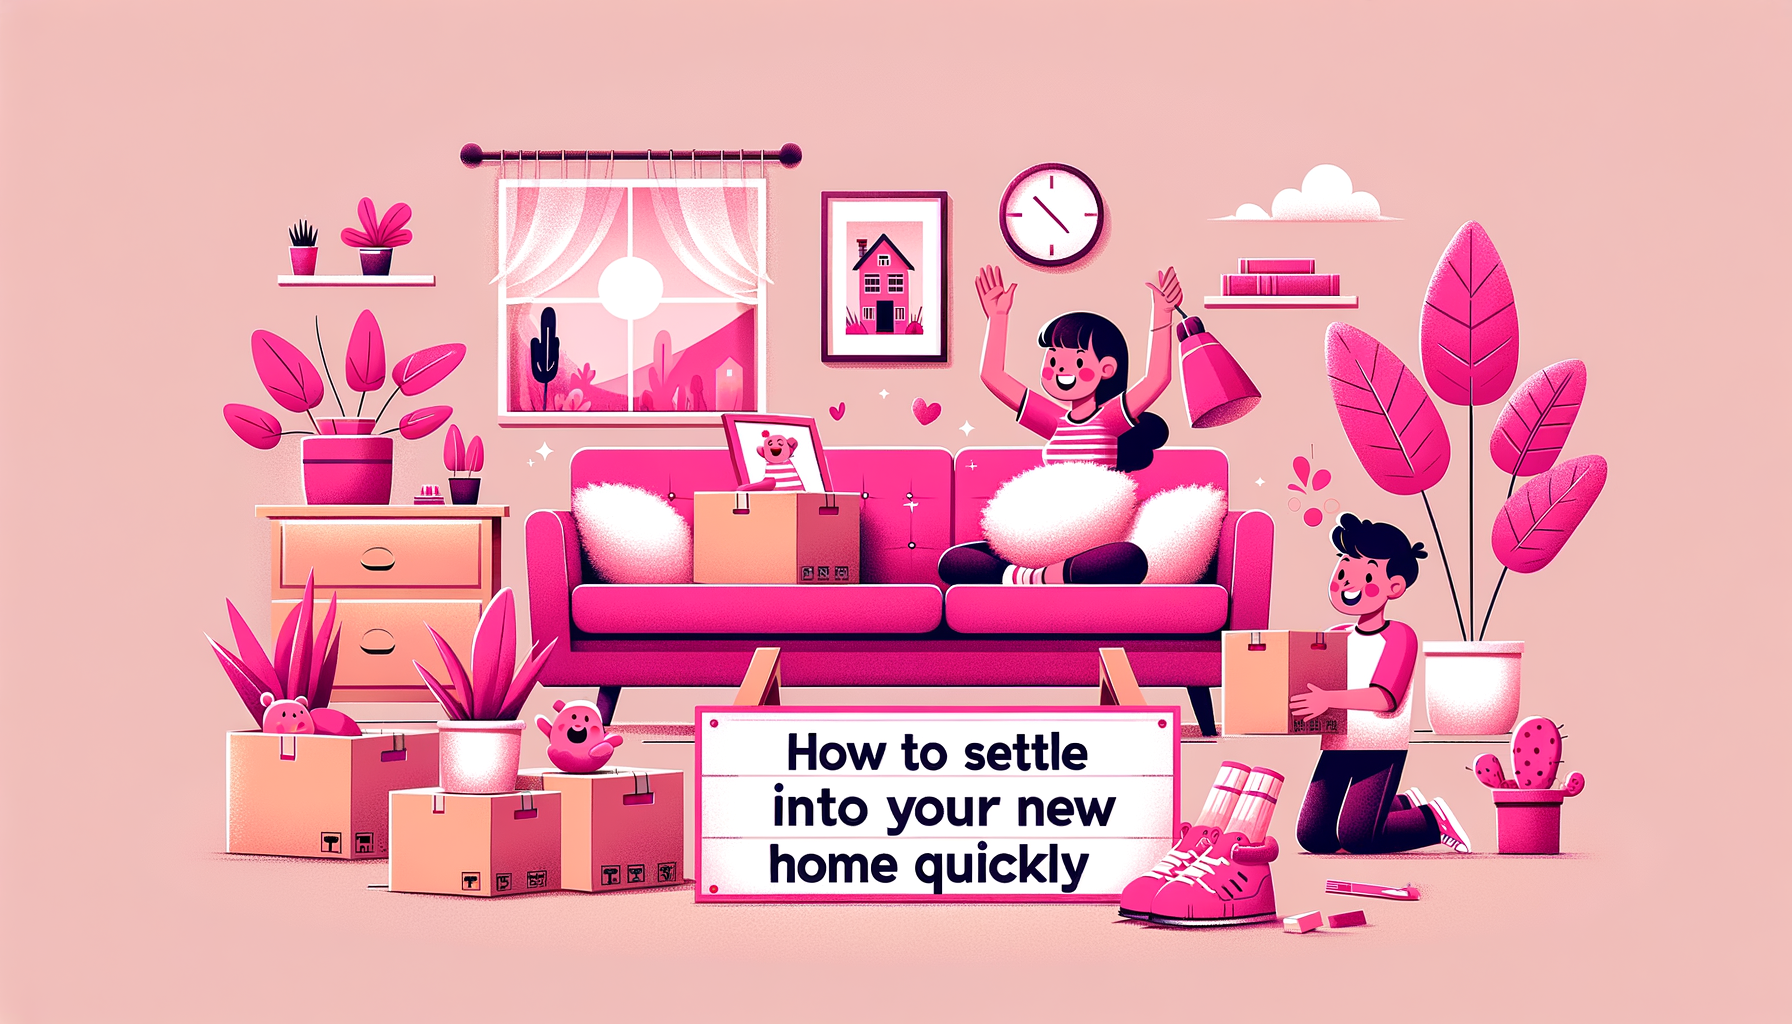 A fuschia colored cartoon illustration of unpacked boxes in a new home